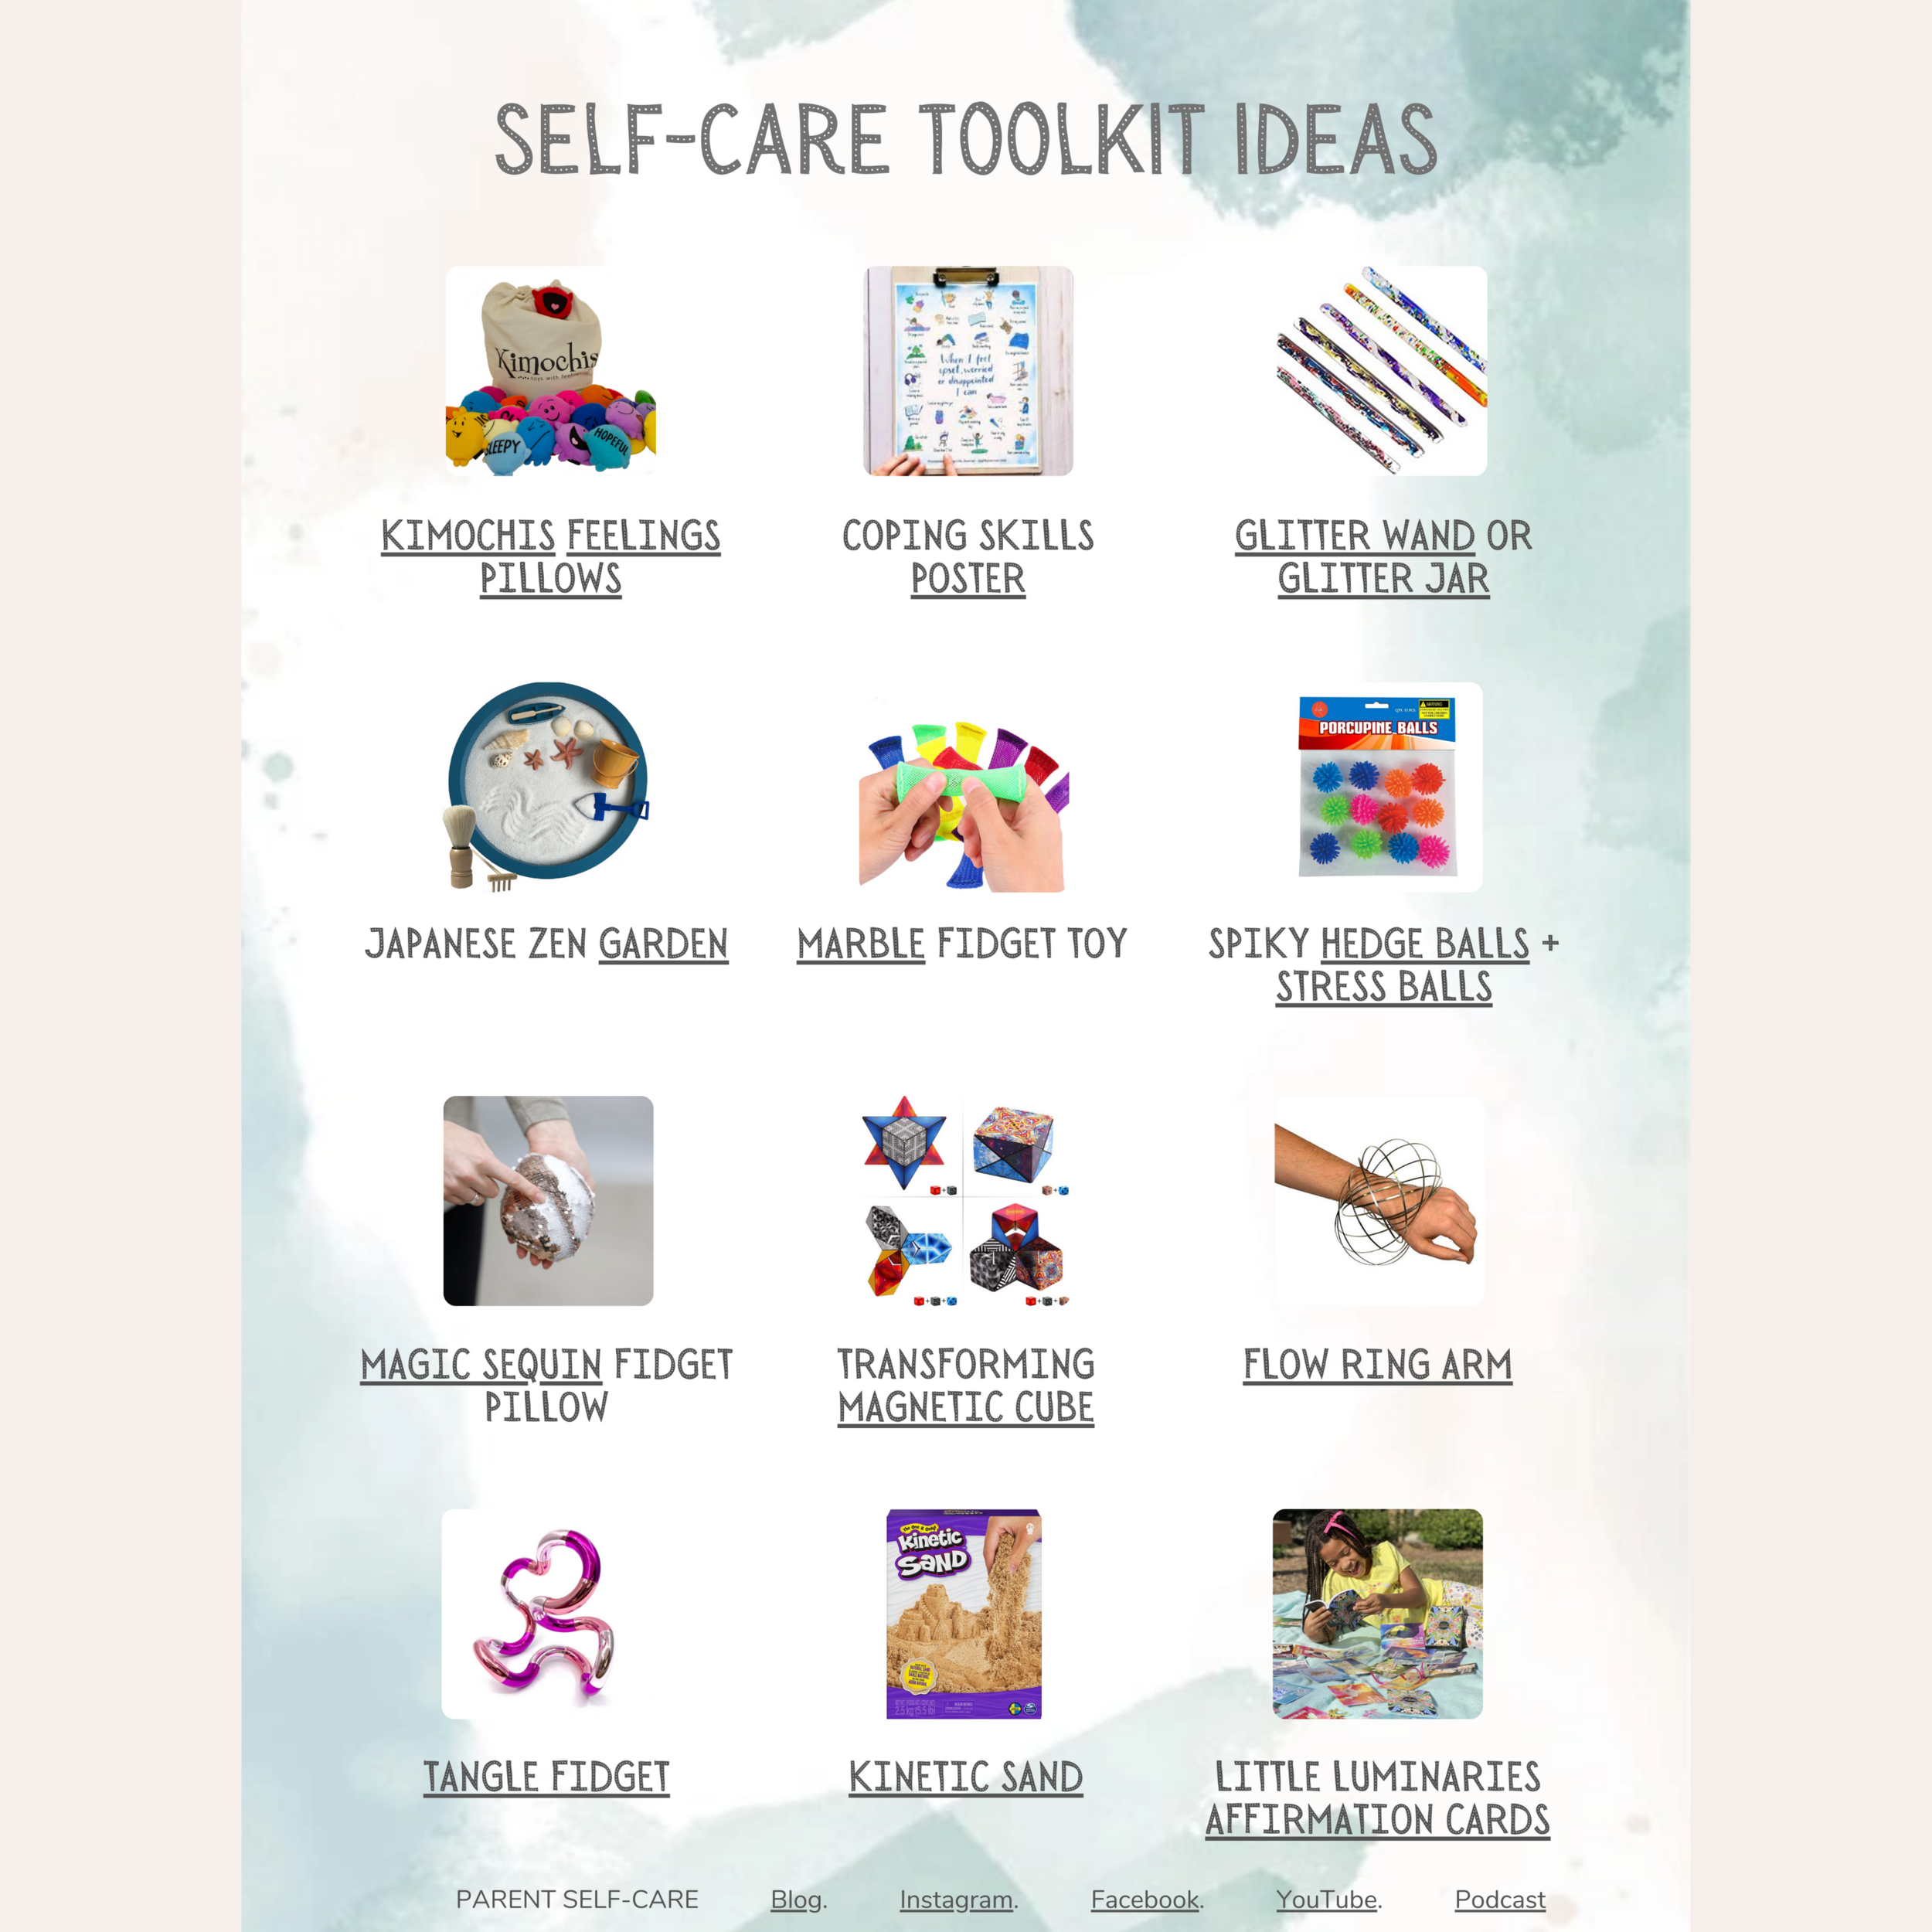 Build a Sensory Self-Soothing Kit